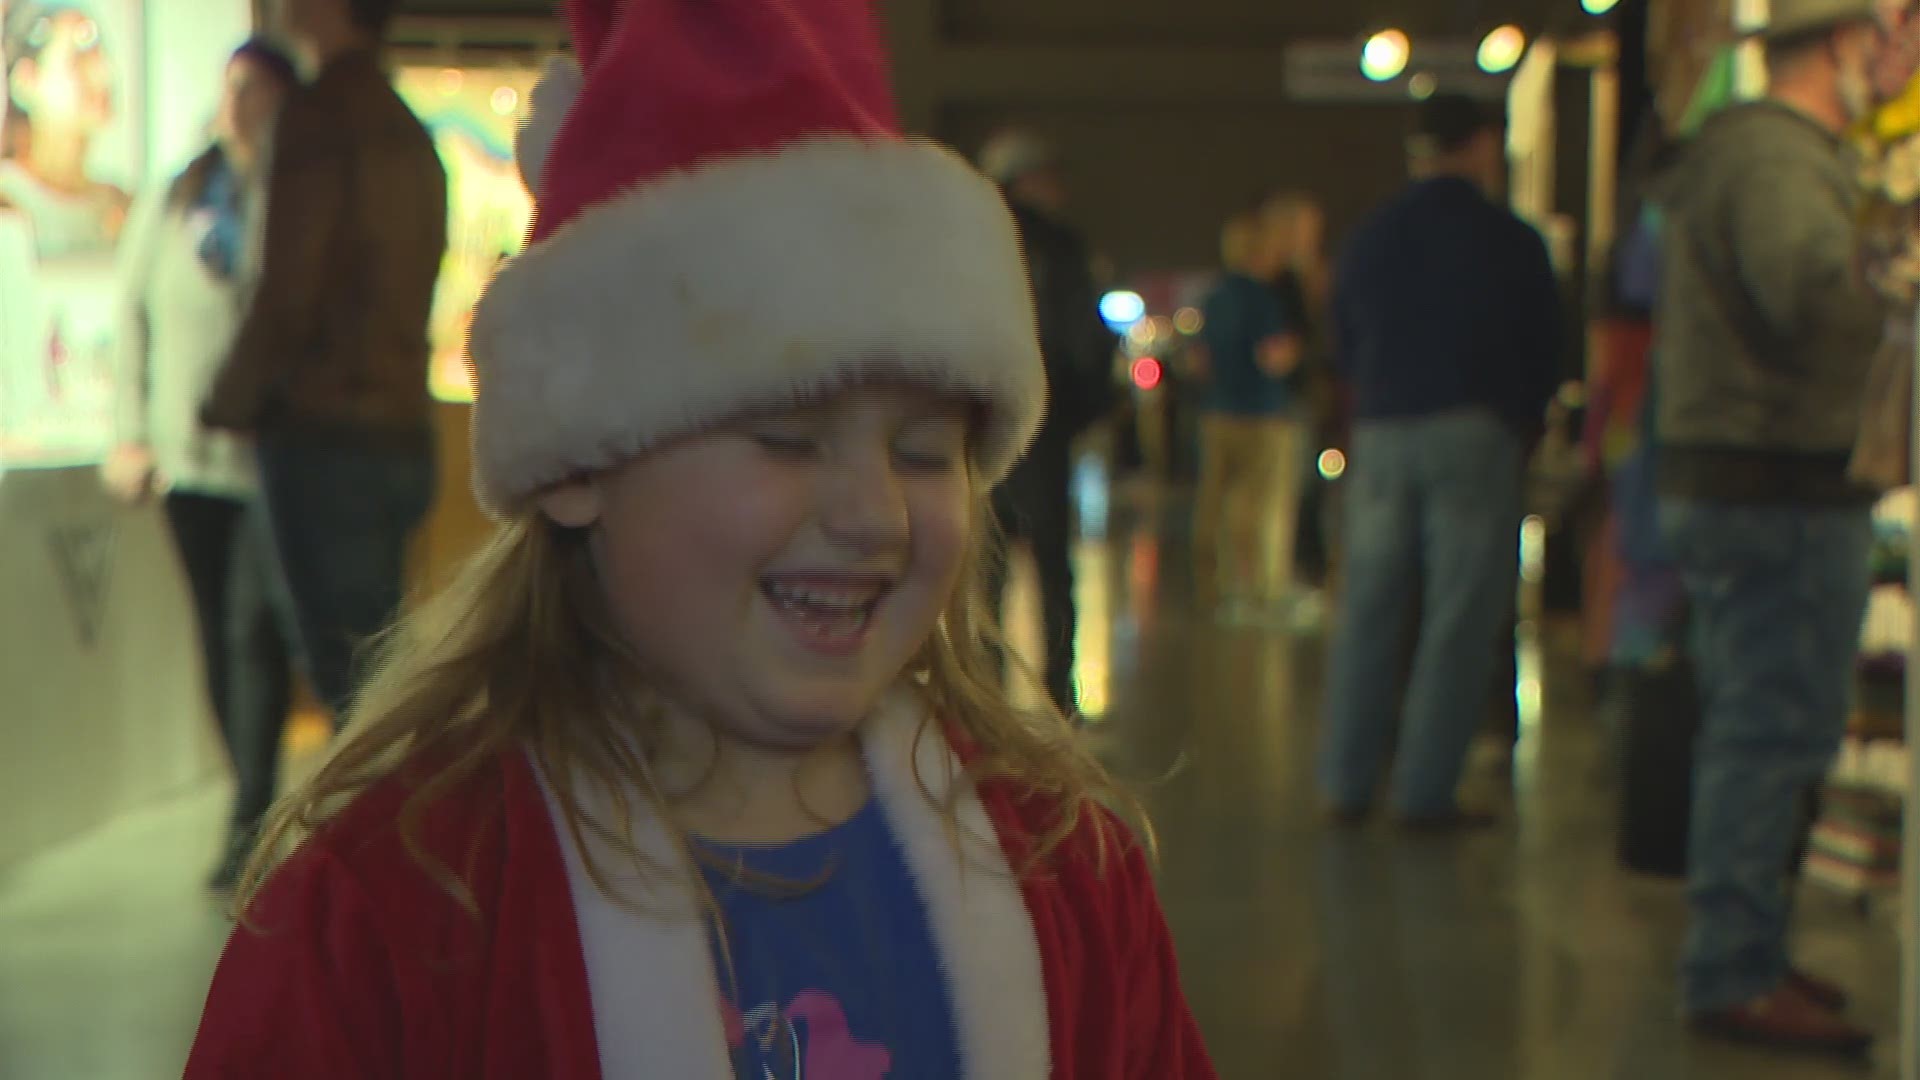 Ariel, who is 6 and a half years old, is excited for Santa to stop by her house this Christmas.